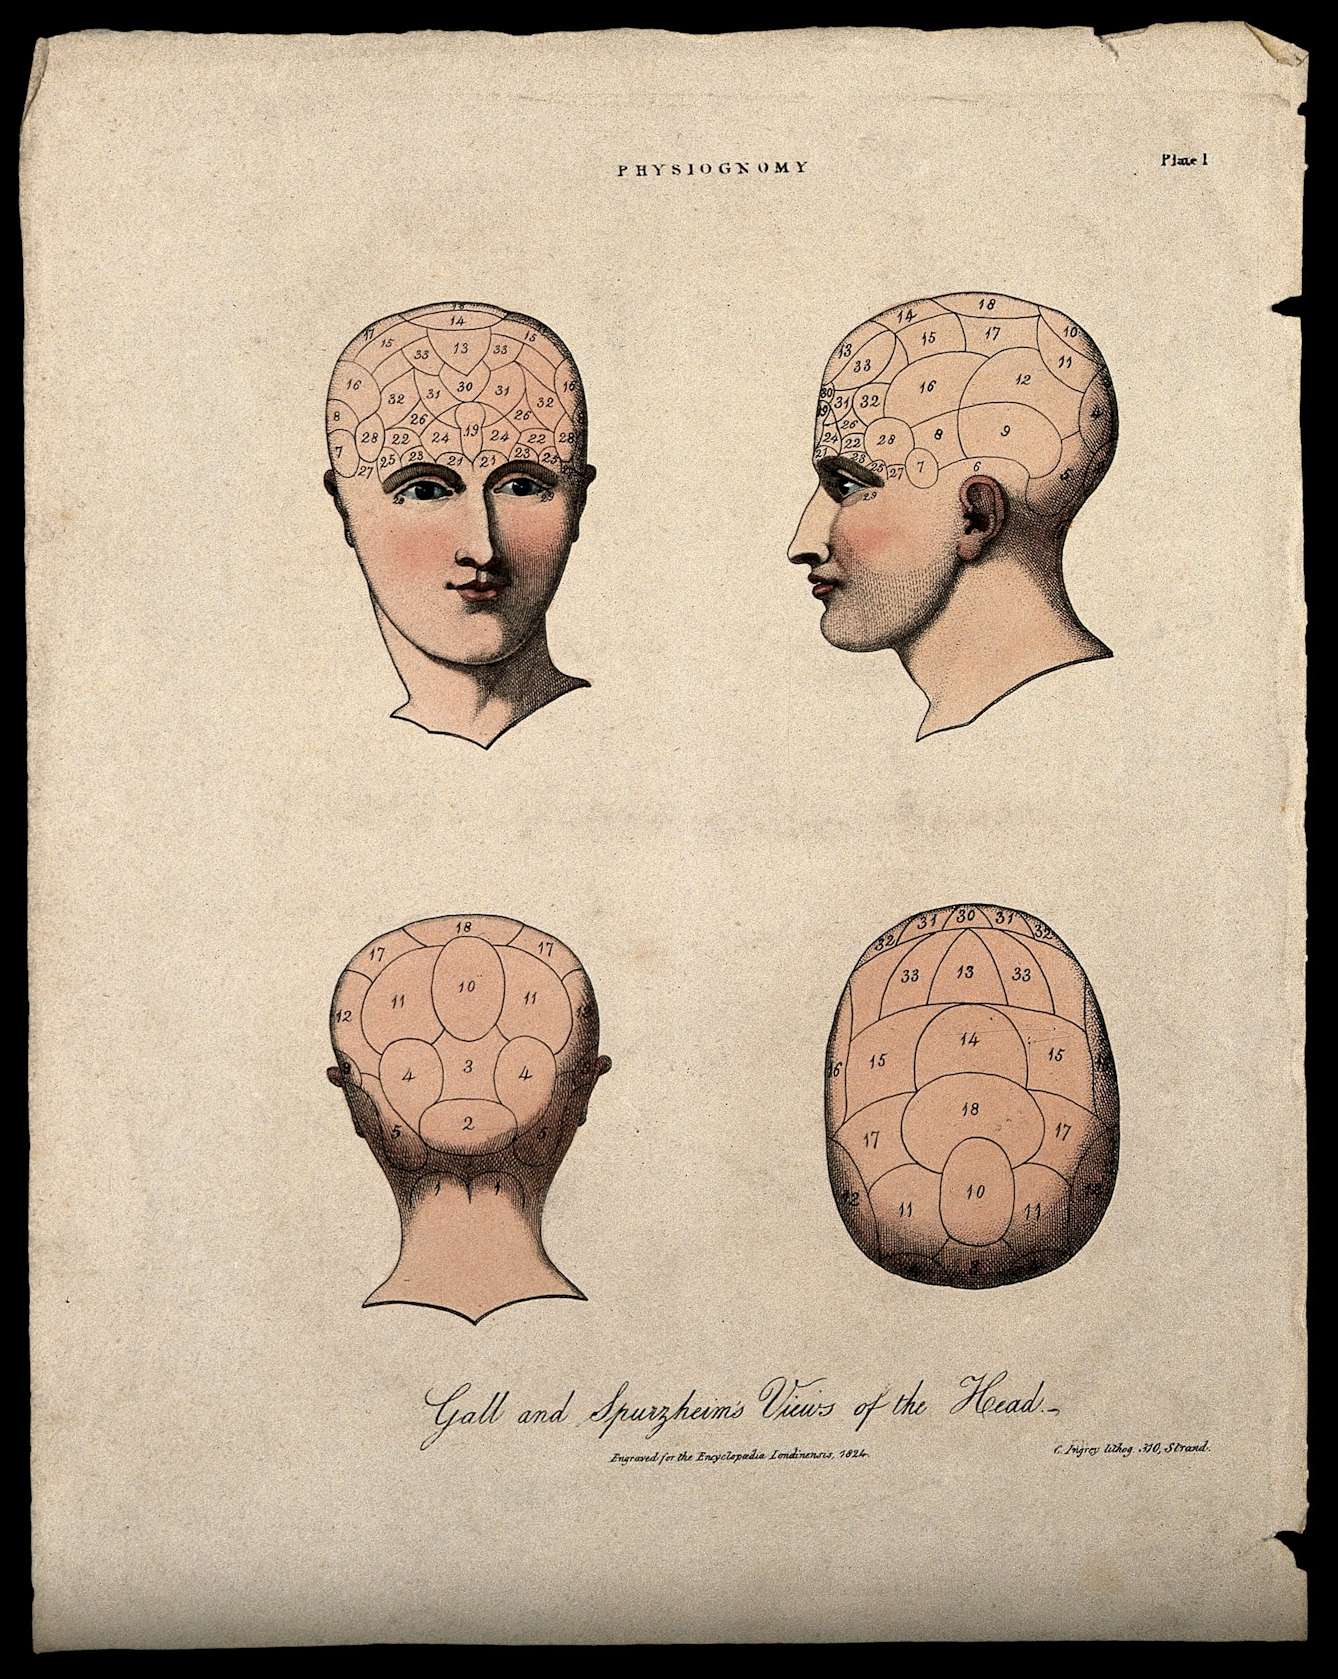 Four views of a human head, sketched with their functional divisions.